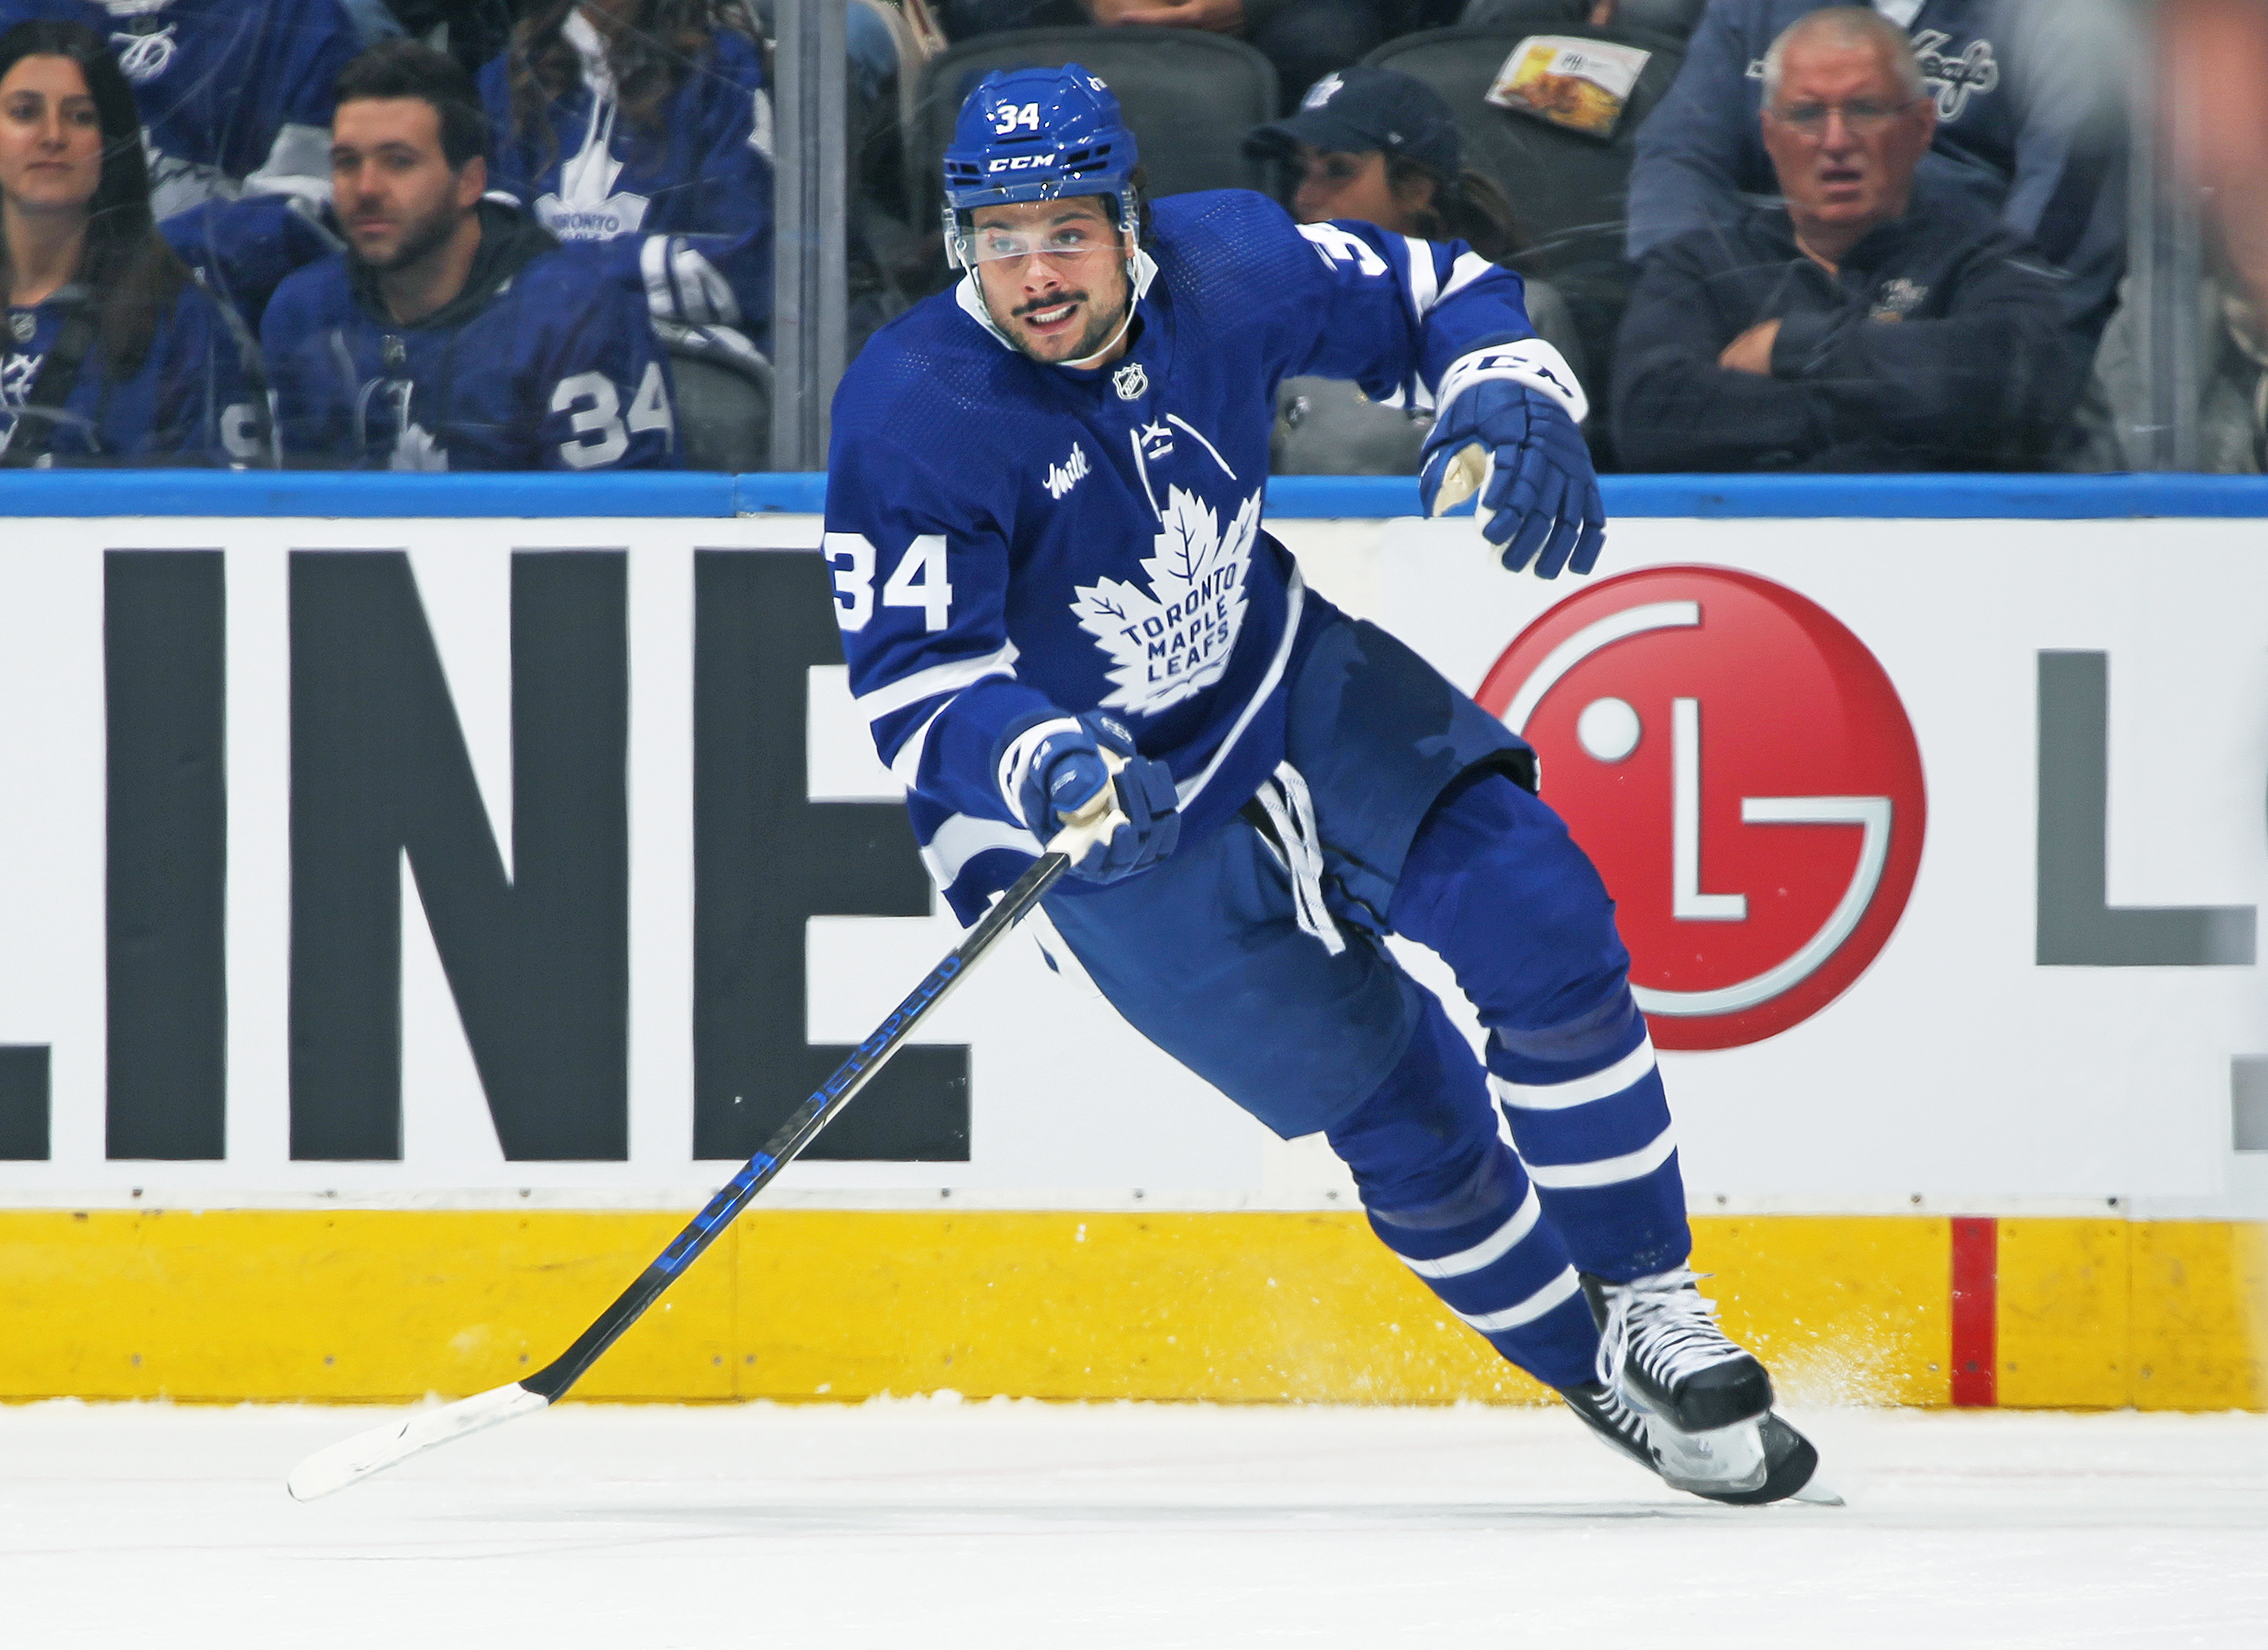 Auston Matthews of the Toronto Maple Leafs skates against the Arizona Coyotes during an NHL game at Scotiabank Arena on October 17, 2022 in Toronto, Ontario, Canada. The Coyotes defeated the Maple Leafs 4-2.